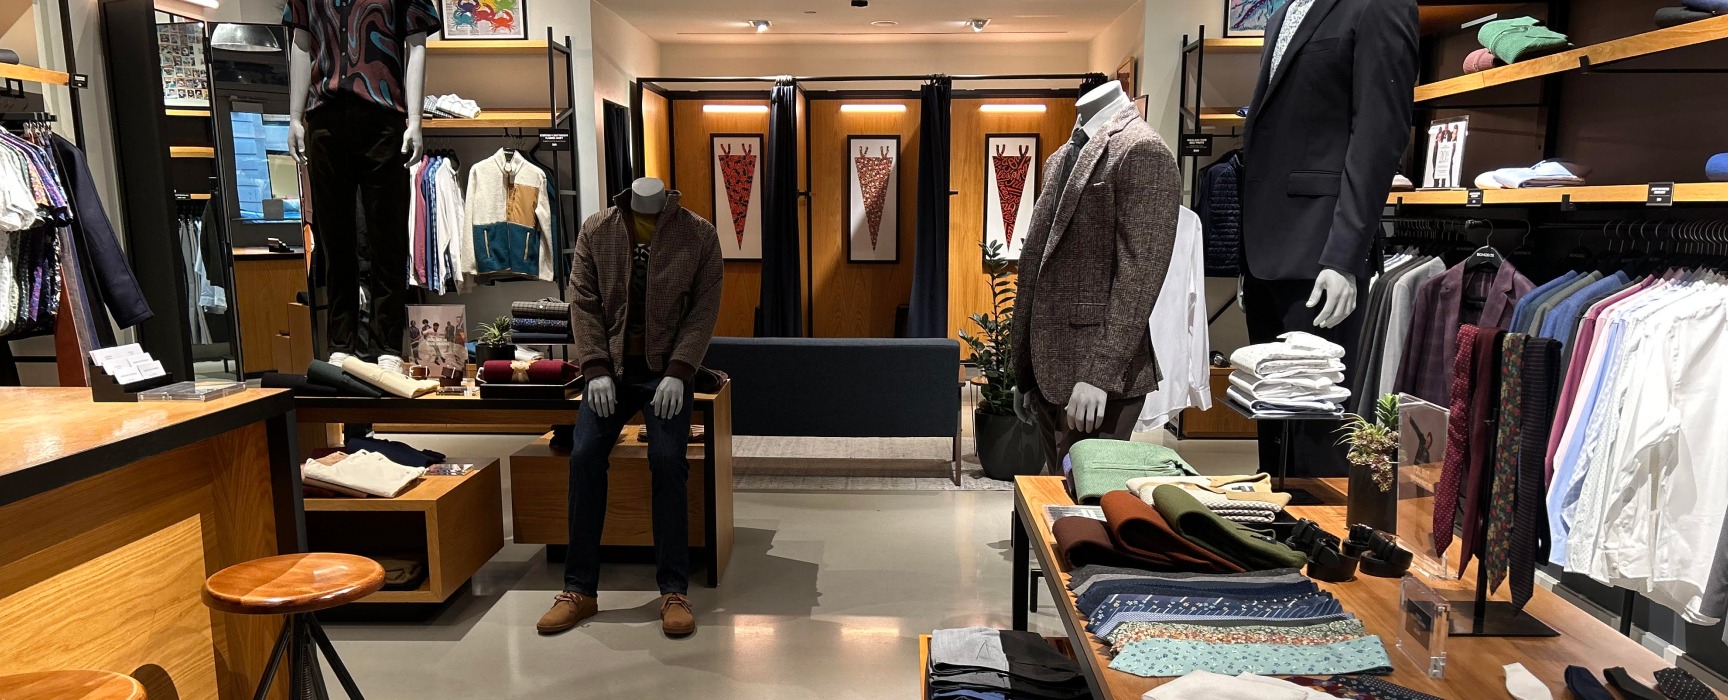 Interior of Bonobos retail store with mannequins outfitted in suits and displays with various ties and suit accessories